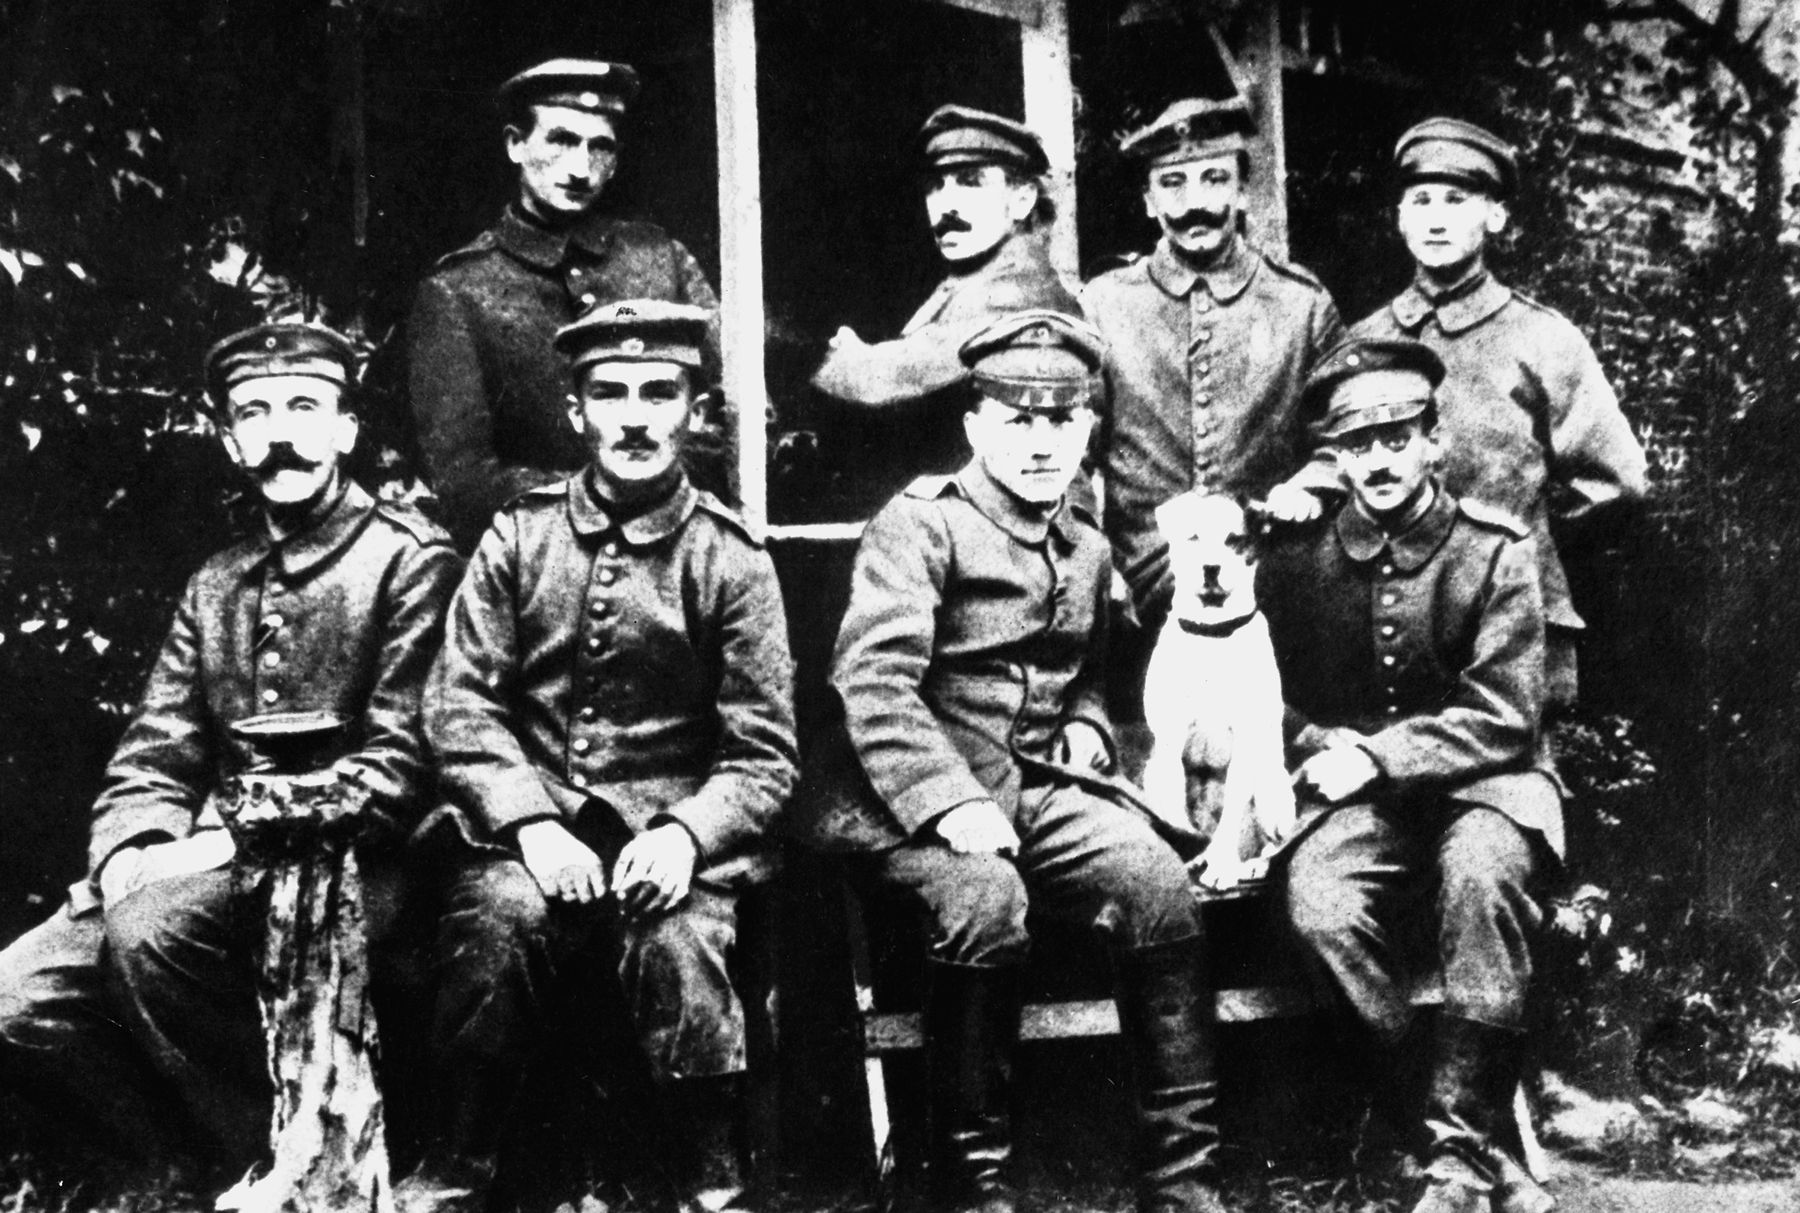 Corporal Hitler, far left, poses with a group of fellow soldiers and their mascot, Foxy, at the front.